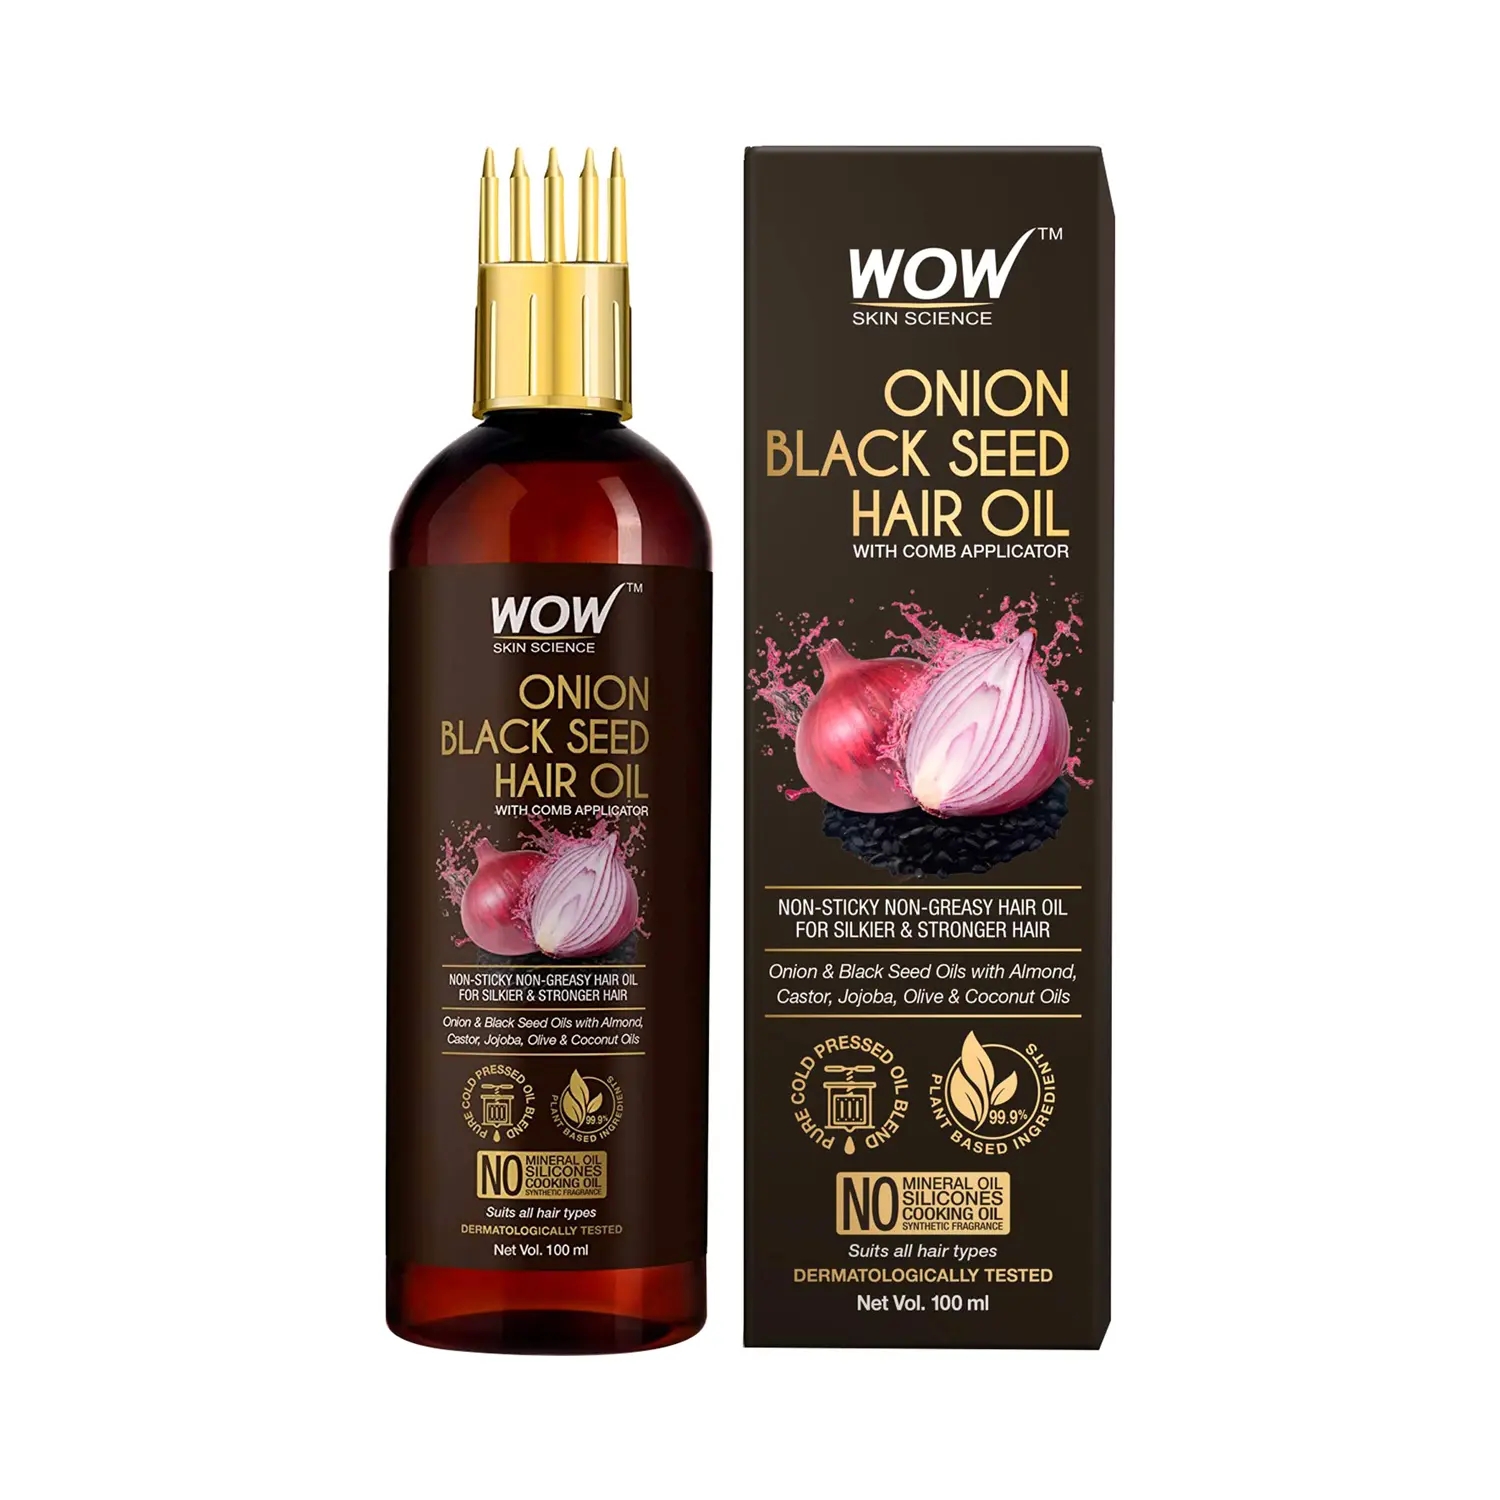 WOW SKIN SCIENCE | WOW SKIN SCIENCE Onion Black Seed Hair Oil With Comb Applicator (100ml)